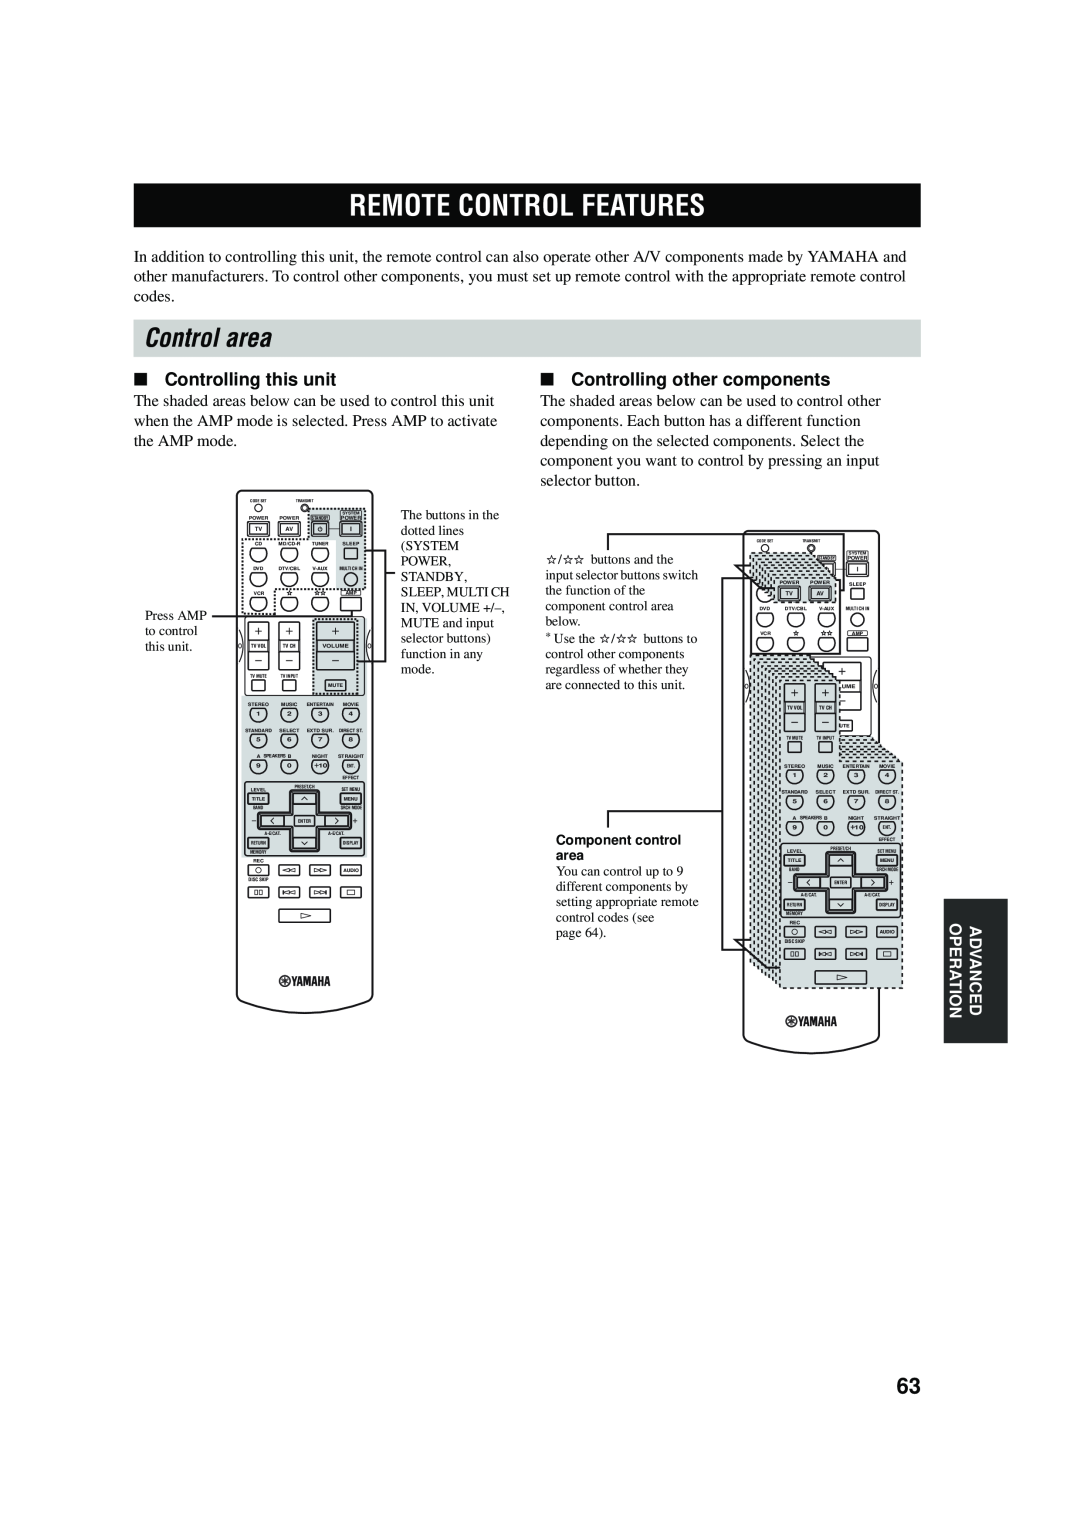 Yamaha RX-V457 owner manual Remote Control Features, Control area, Controlling this unit, Controlling other components 